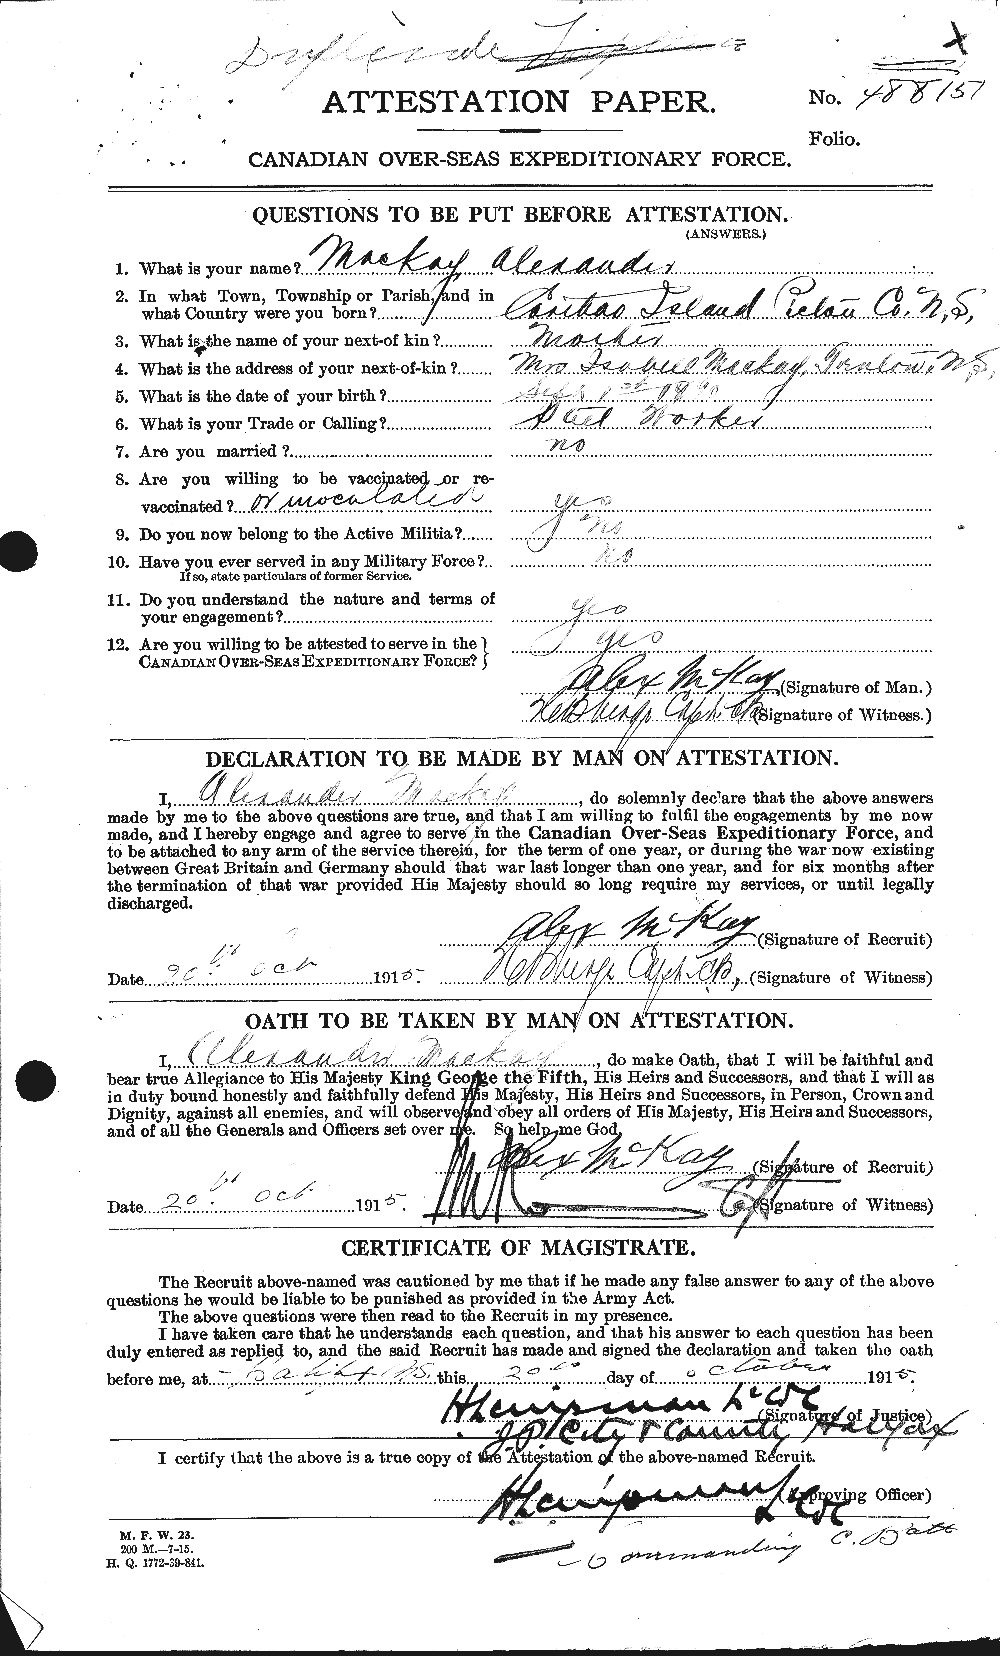 Personnel Records of the First World War - CEF 530921a